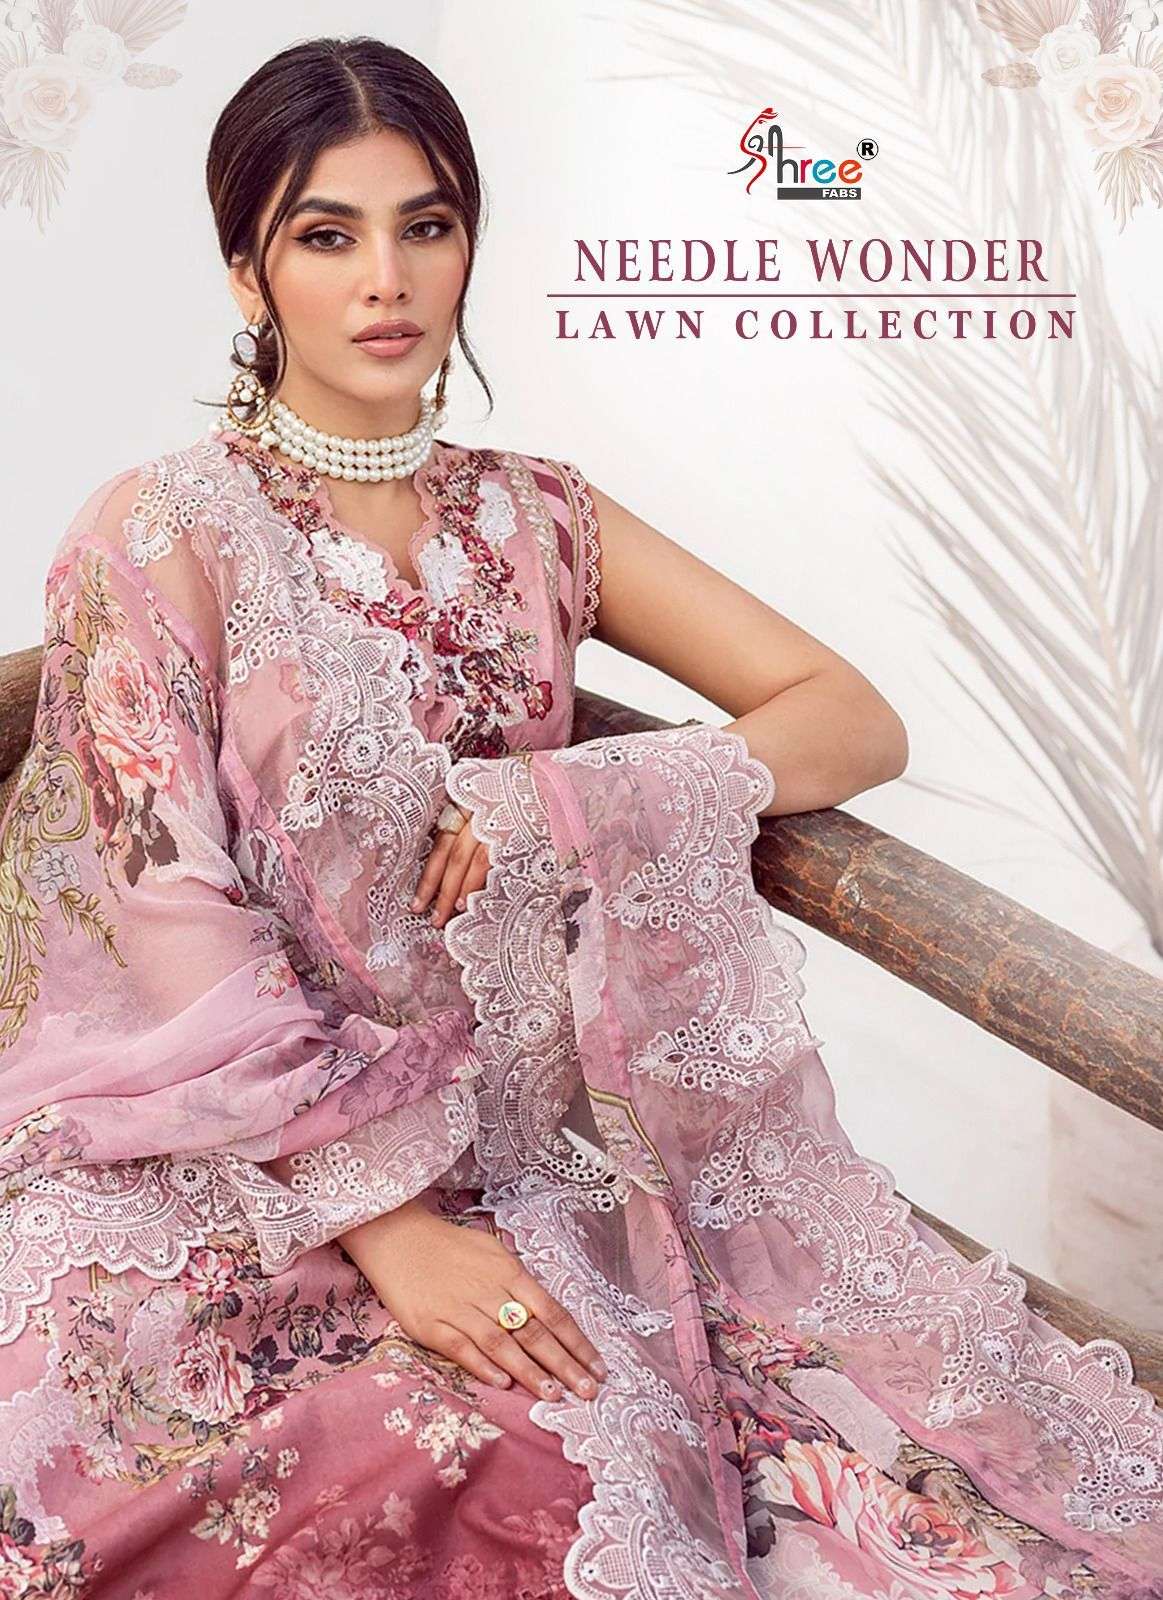 SHREE FAB NEEDLE WONDER LAWN COLLECTION DESIGNER COTTON PRINT WITH PATCH EMBROIDERY WORK PAKISTANI REPLICA SUITS WHOLESALE 